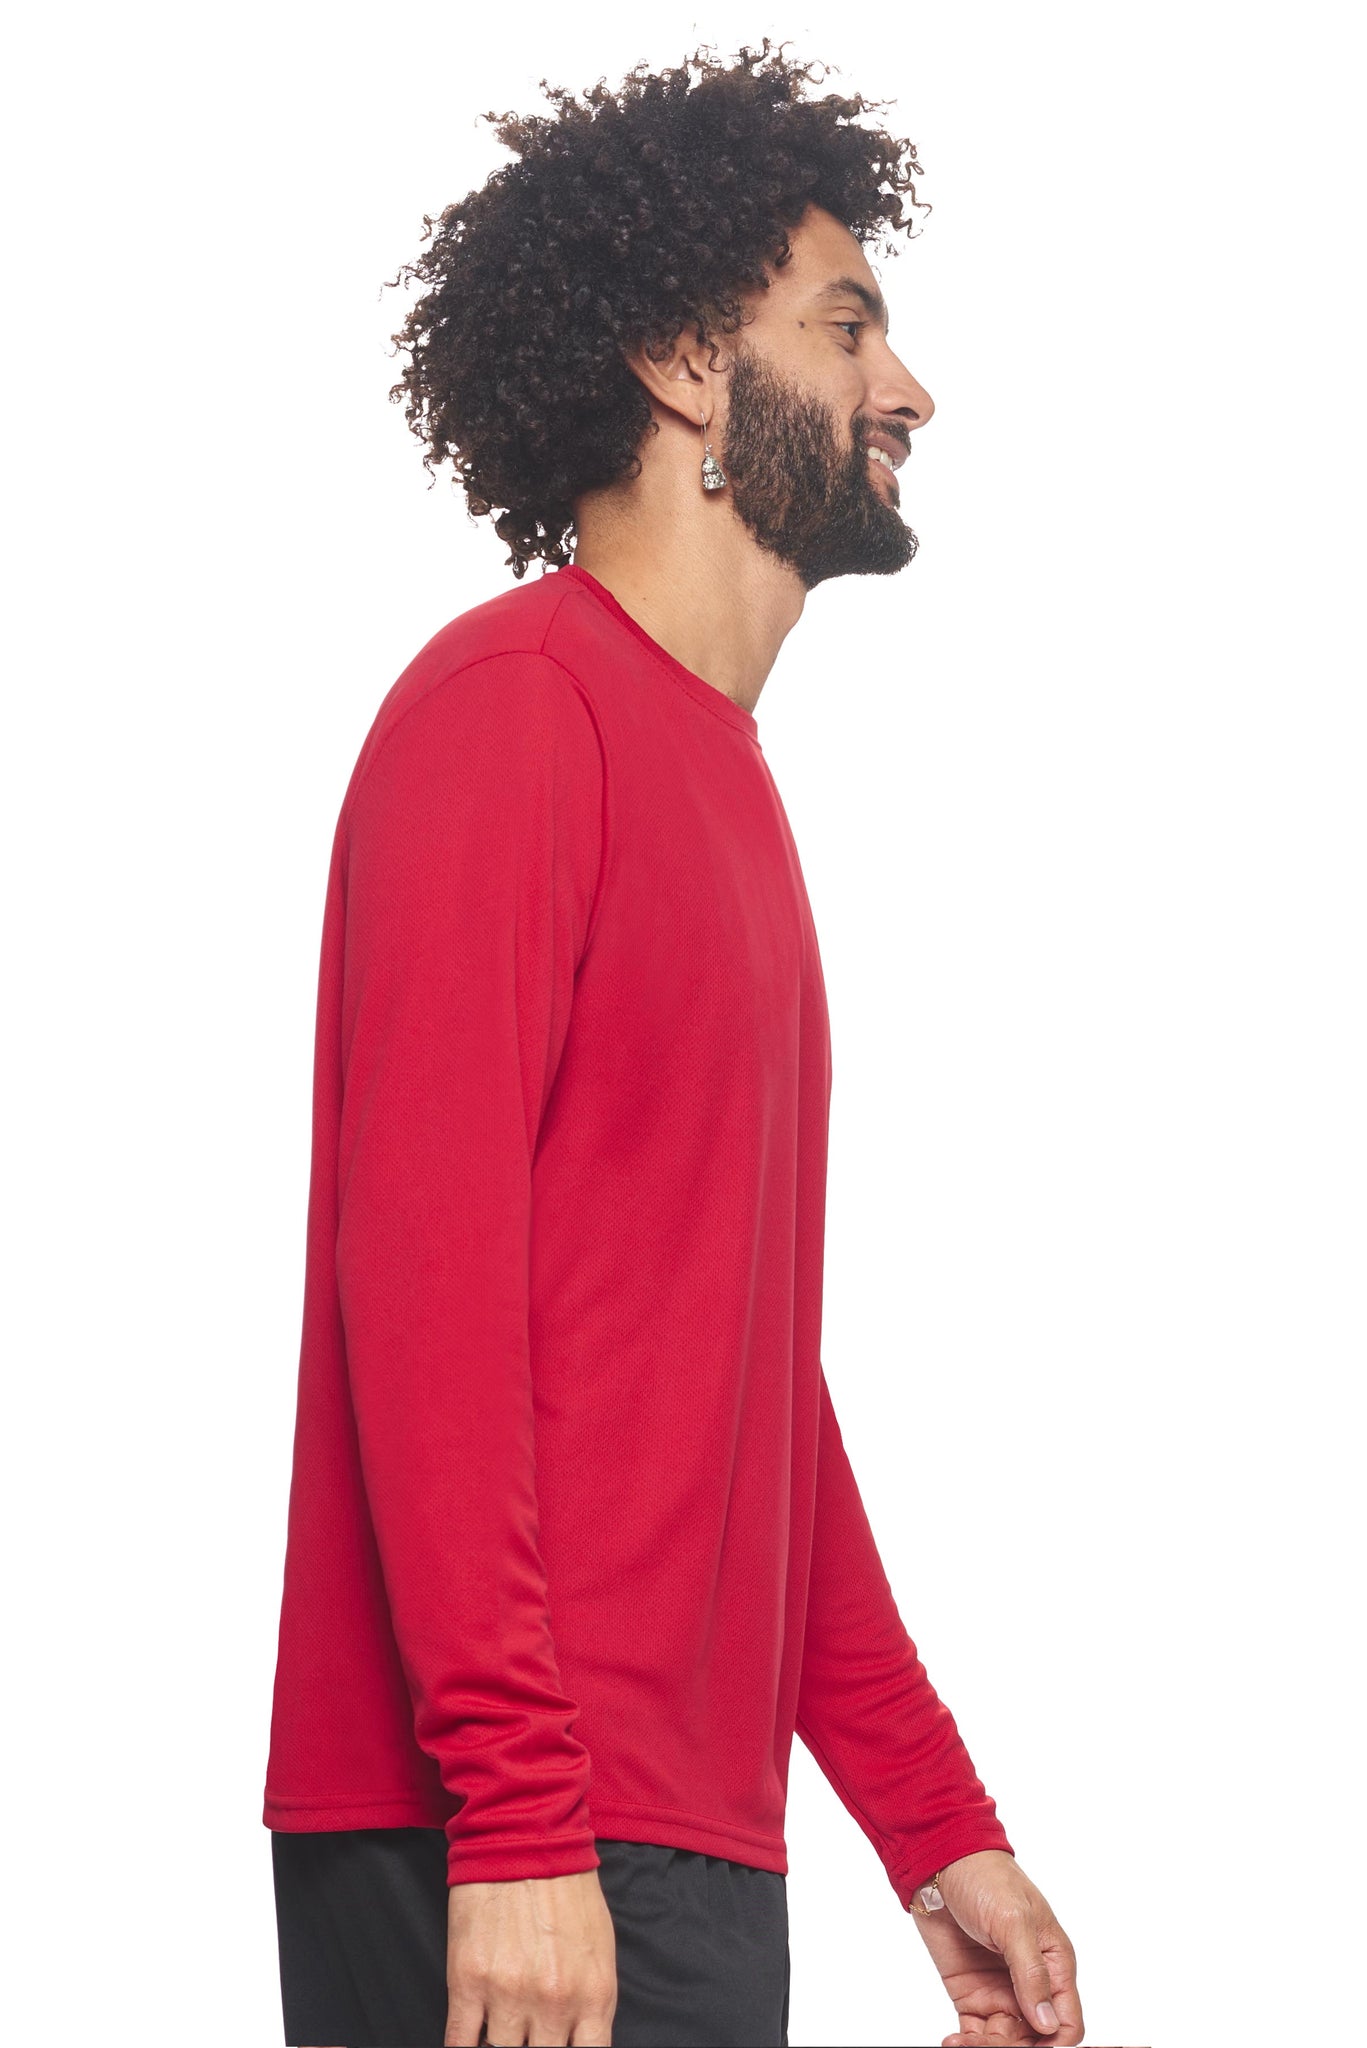 Expert Brand Wholesale Men's Oxymesh Performance Long Sleeve Tec Tee Made in USA AJ901D Red Image 2#true-red